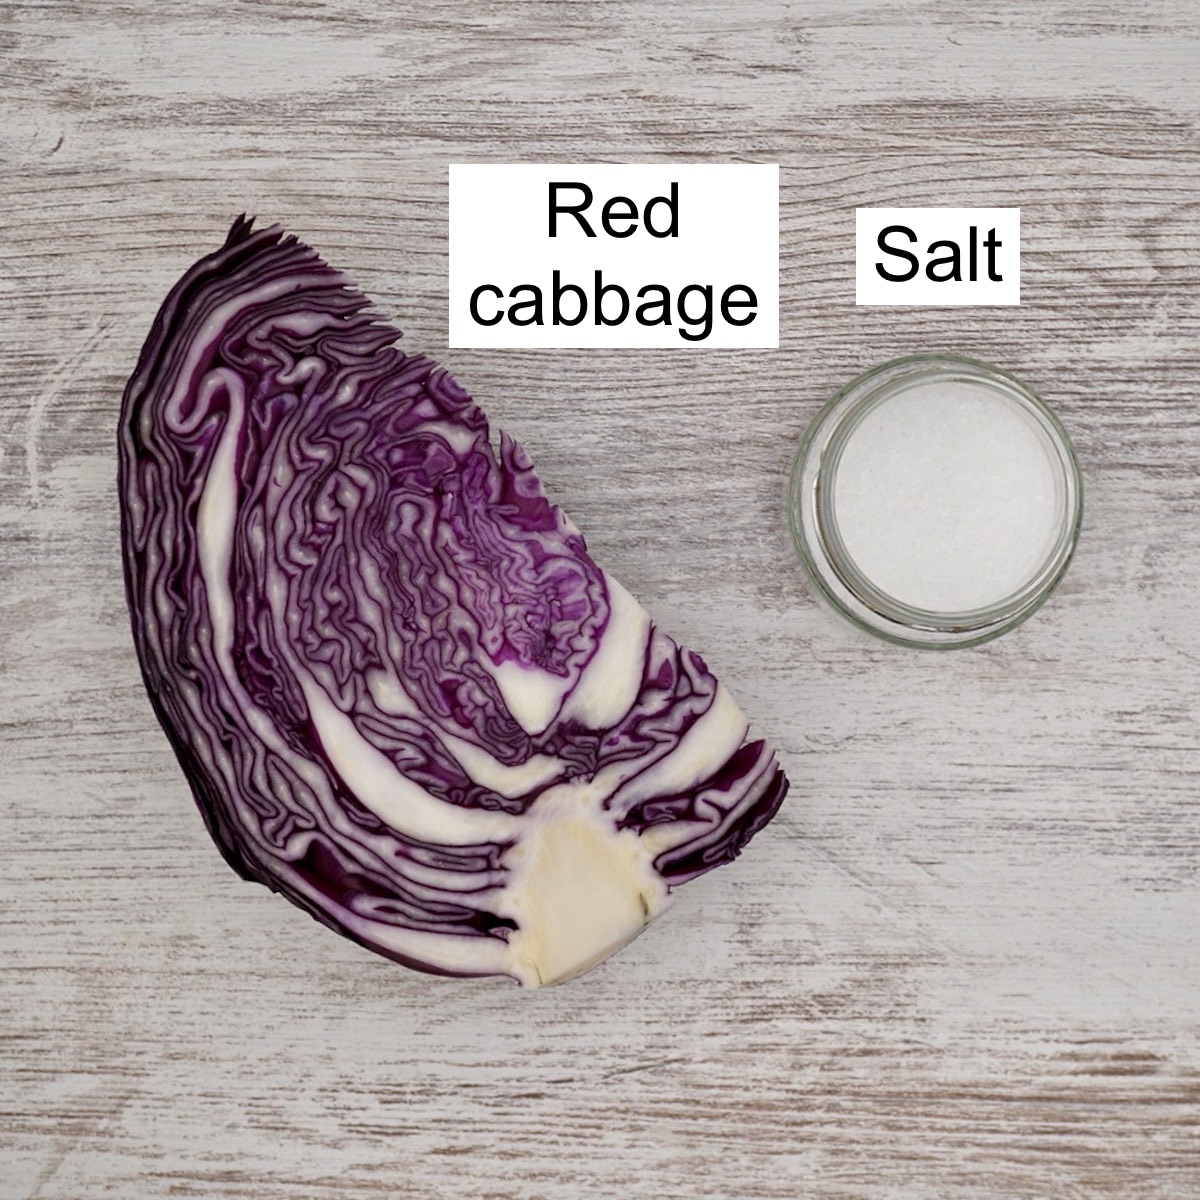 A wedge of red cabbage and a jar of salt with annotation.